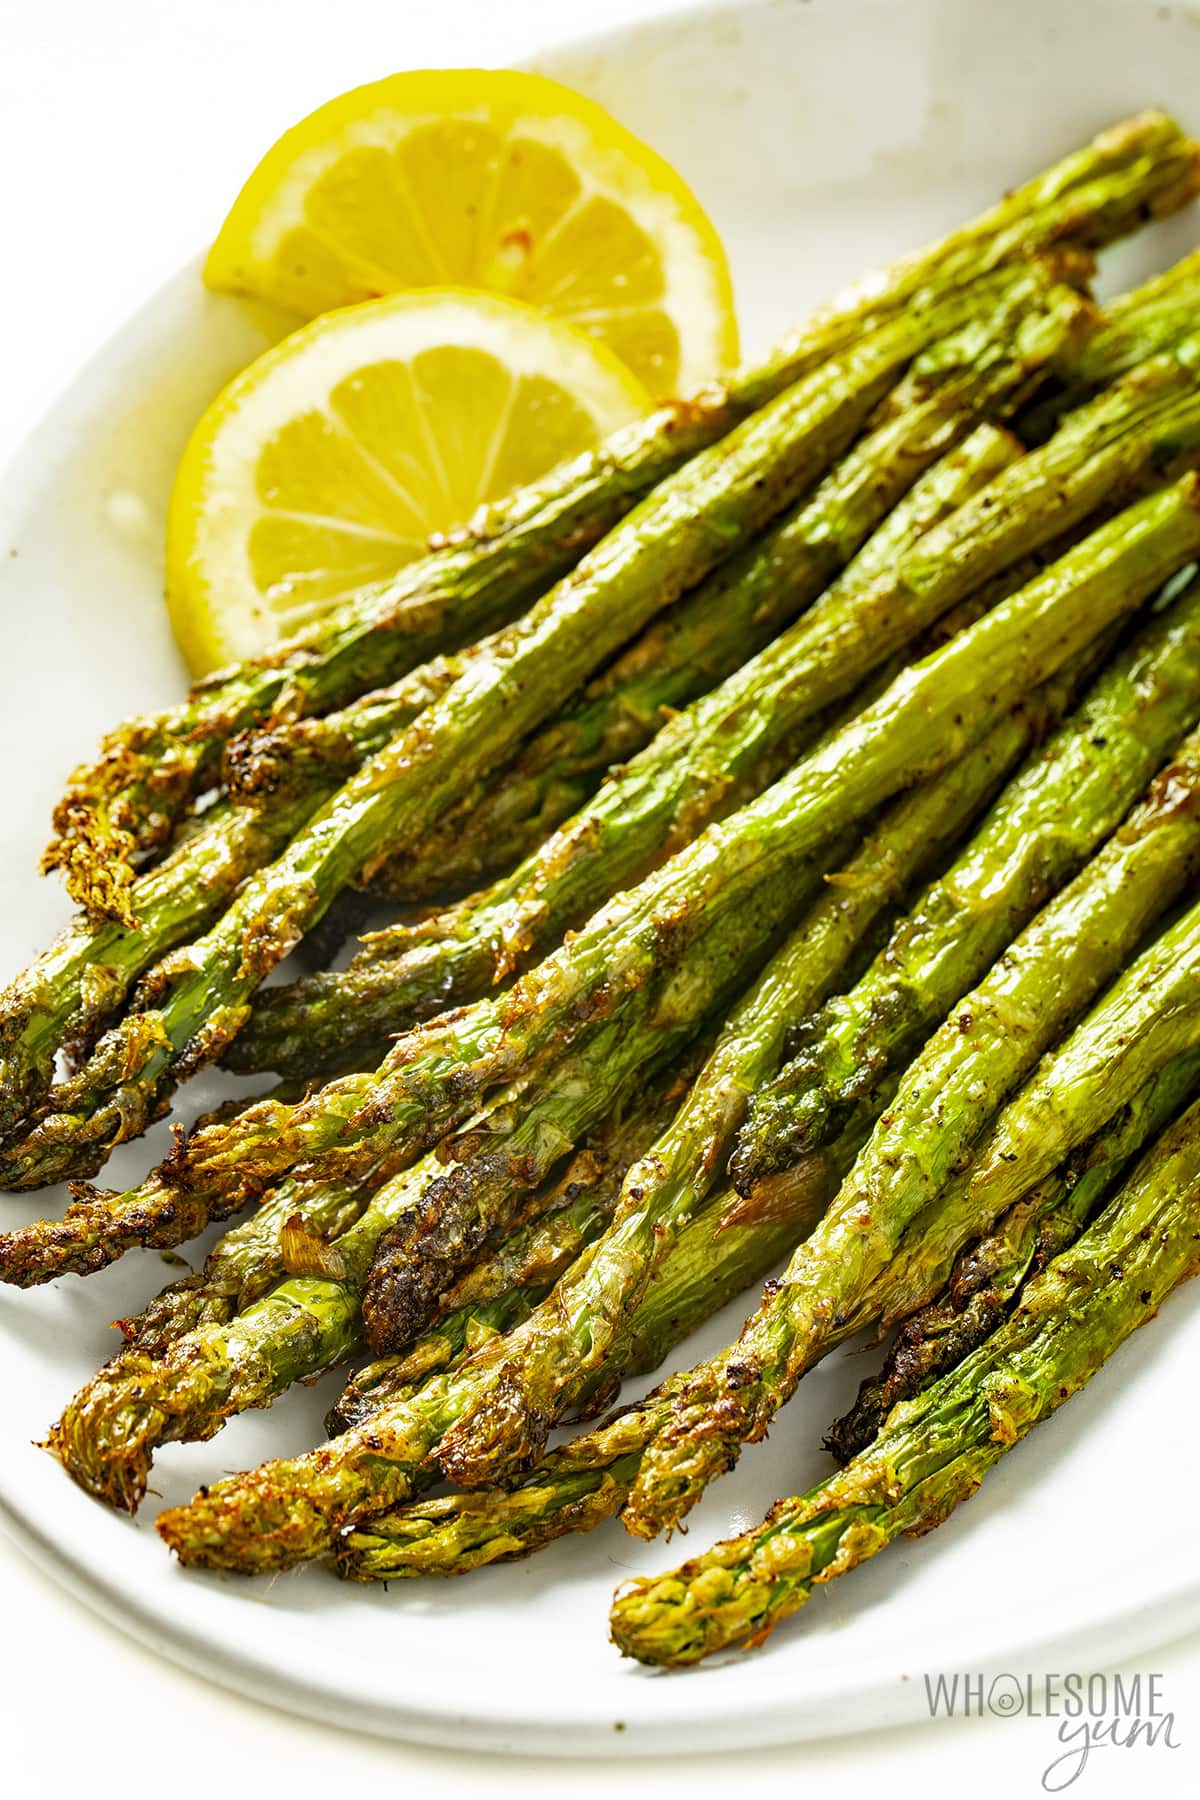 Plate of air fried asparagus with lemon wedges.